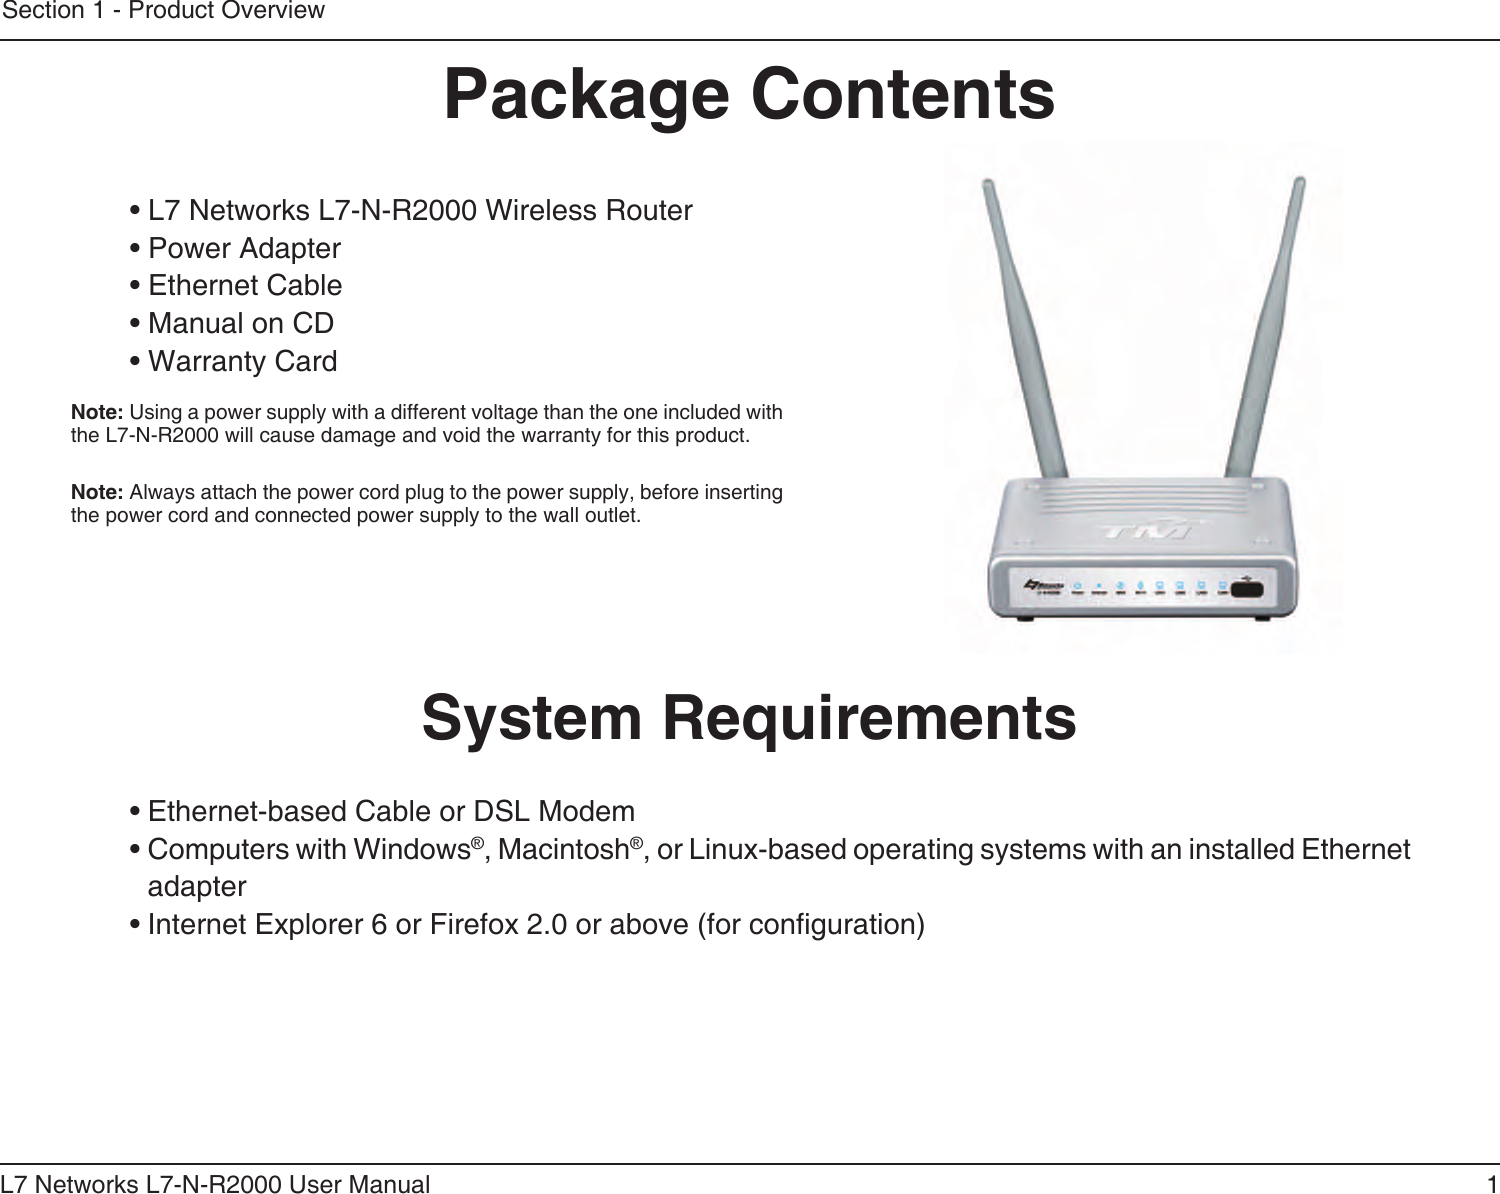 1L7 Networks L7-N-R2000 User ManualSection 1 - Product Overview• L7 Networks L7-N-R2000 Wireless Router• Power Adapter• Ethernet Cable• Manual on CD• Warranty CardSystem Requirements• Ethernet-based Cable or DSL Modem• Computers with Windows®, Macintosh®, or Linux-based operating systems with an installed Ethernet adapter• Internet Explorer 6 or Firefox 2.0 or above (for conguration)Package ContentsNote: Using a power supply with a different voltage than the one included with the L7-N-R2000 will cause damage and void the warranty for this product.Note: Always attach the power cord plug to the power supply, before inserting the power cord and connected power supply to the wall outlet.